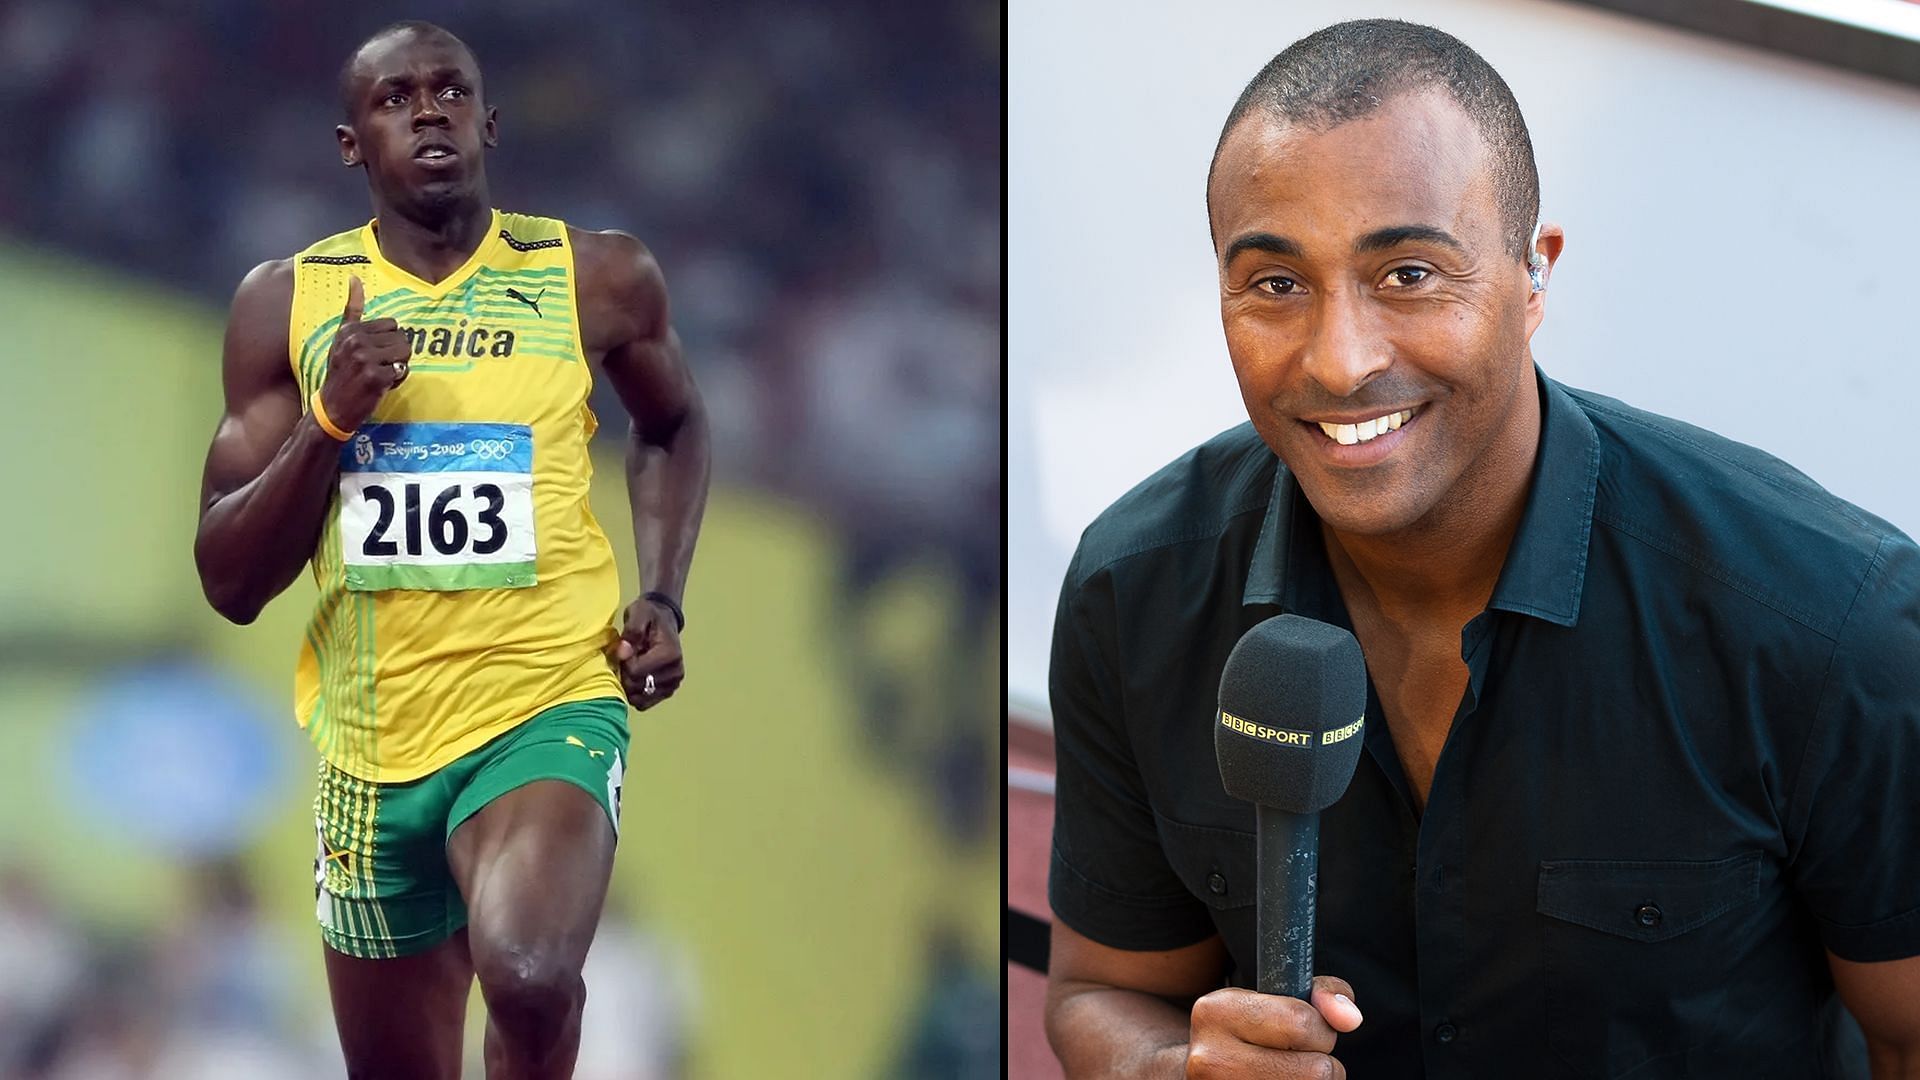 Usain Bolt was praised by Colin Jackson for his achievements and persona